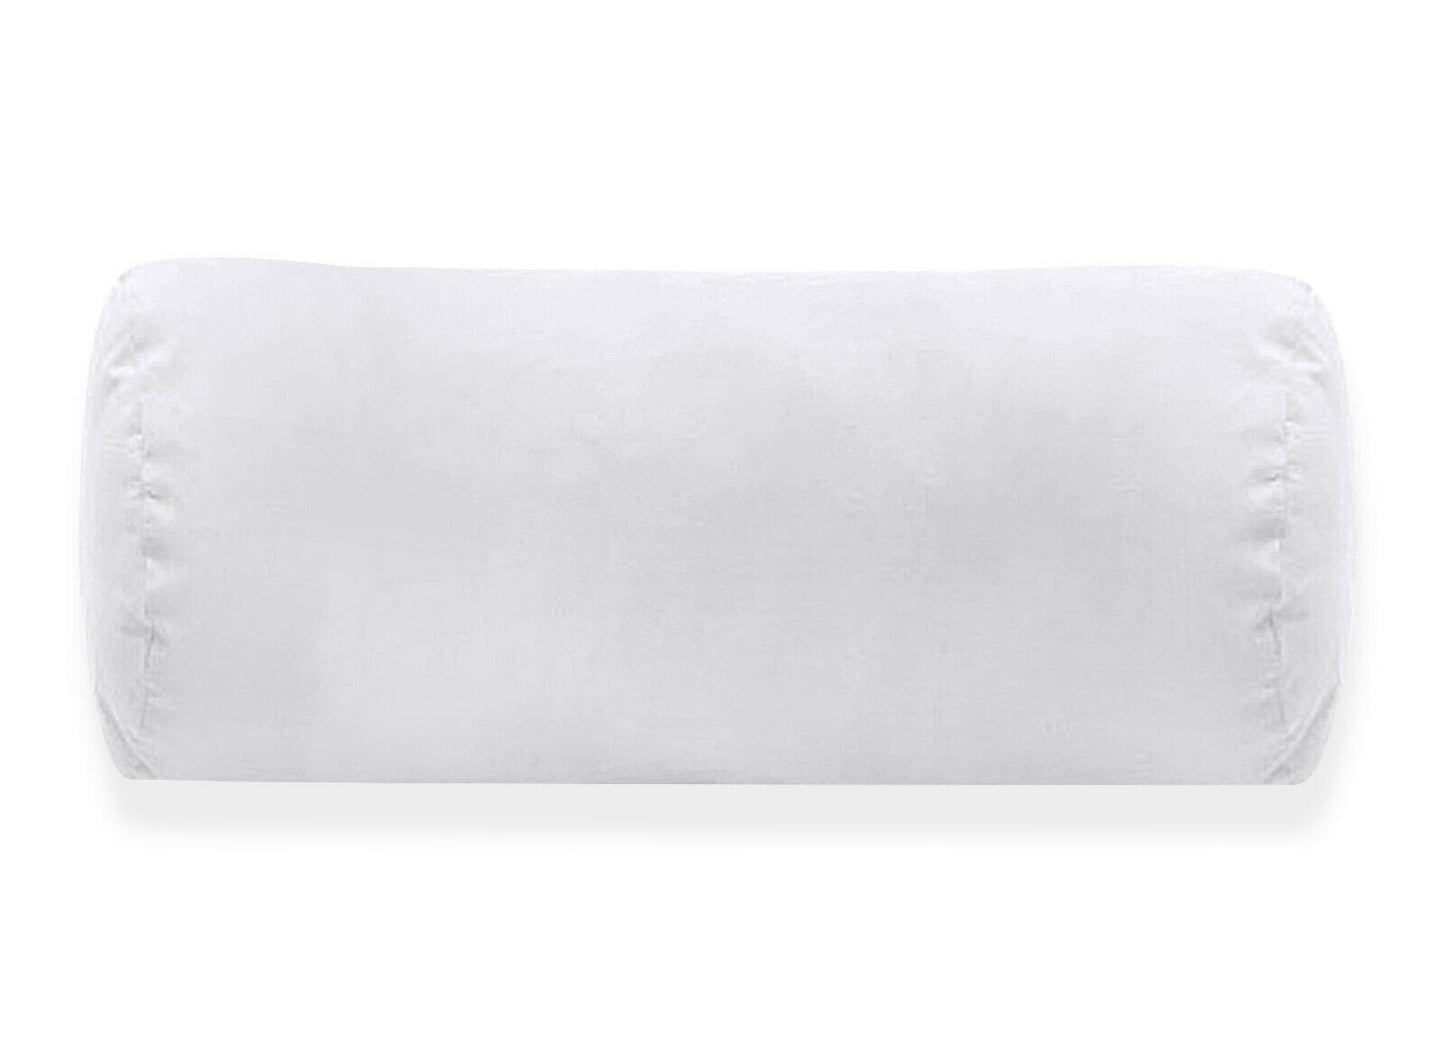 Round Shaped Bolster Pillow White Cushion Long Body Support Orthopaedic Pillow